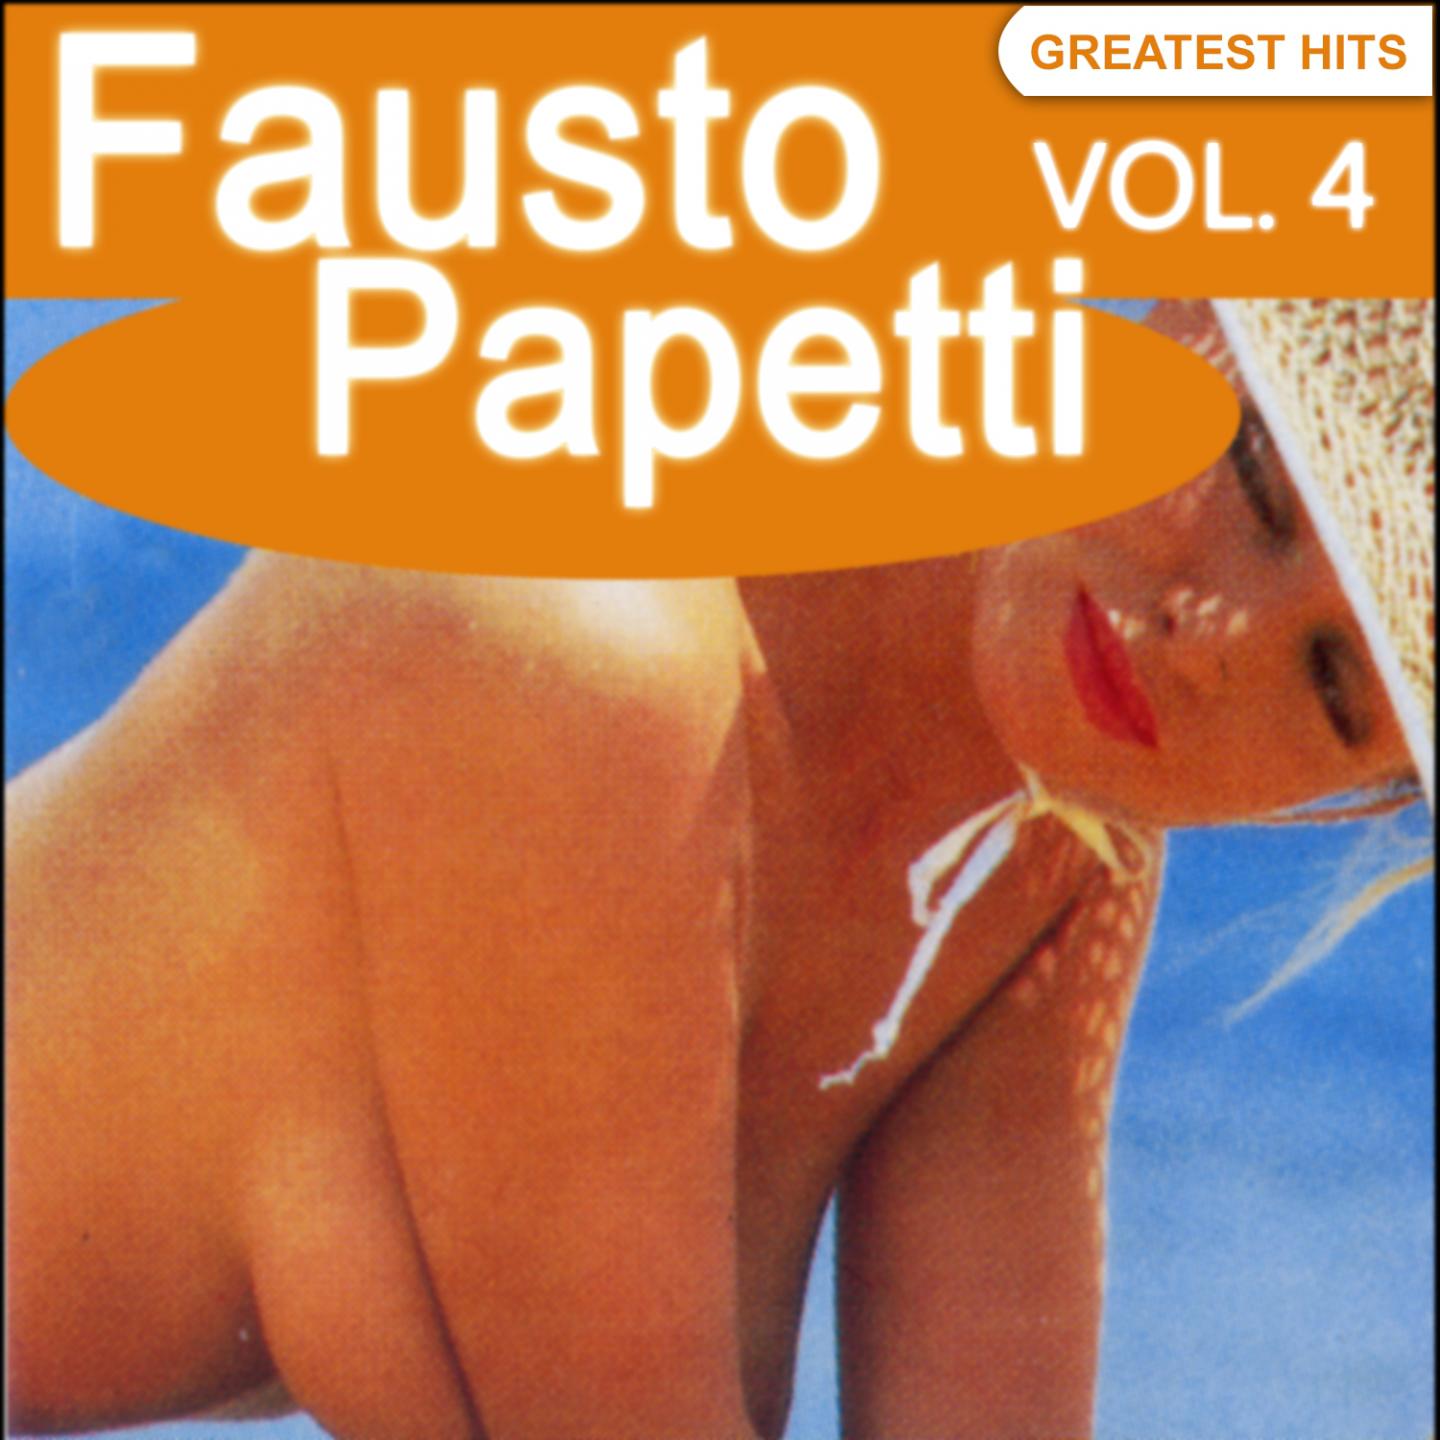 Fausto Papetti Greatest Hits, Vol. 4 (Remastered)专辑